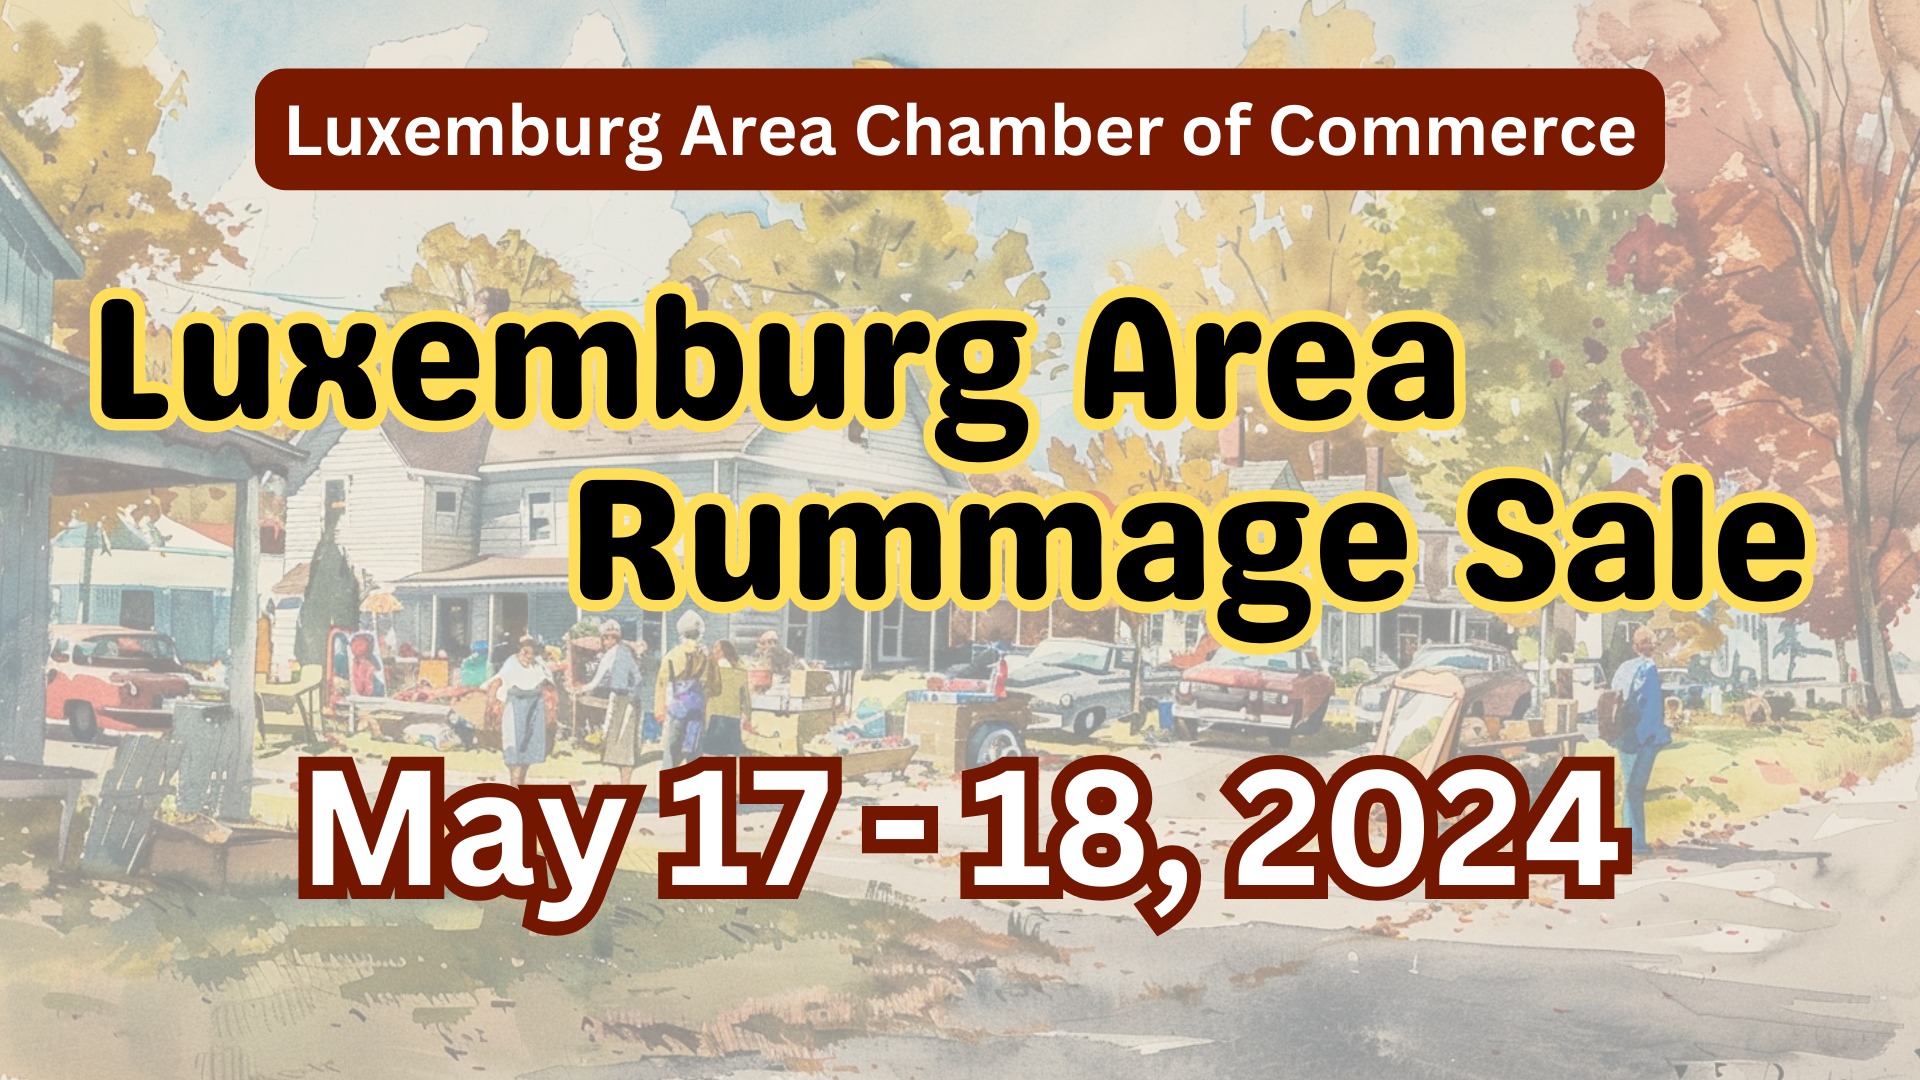 Header showing the dates of the rummage sale, faint image of americana in background